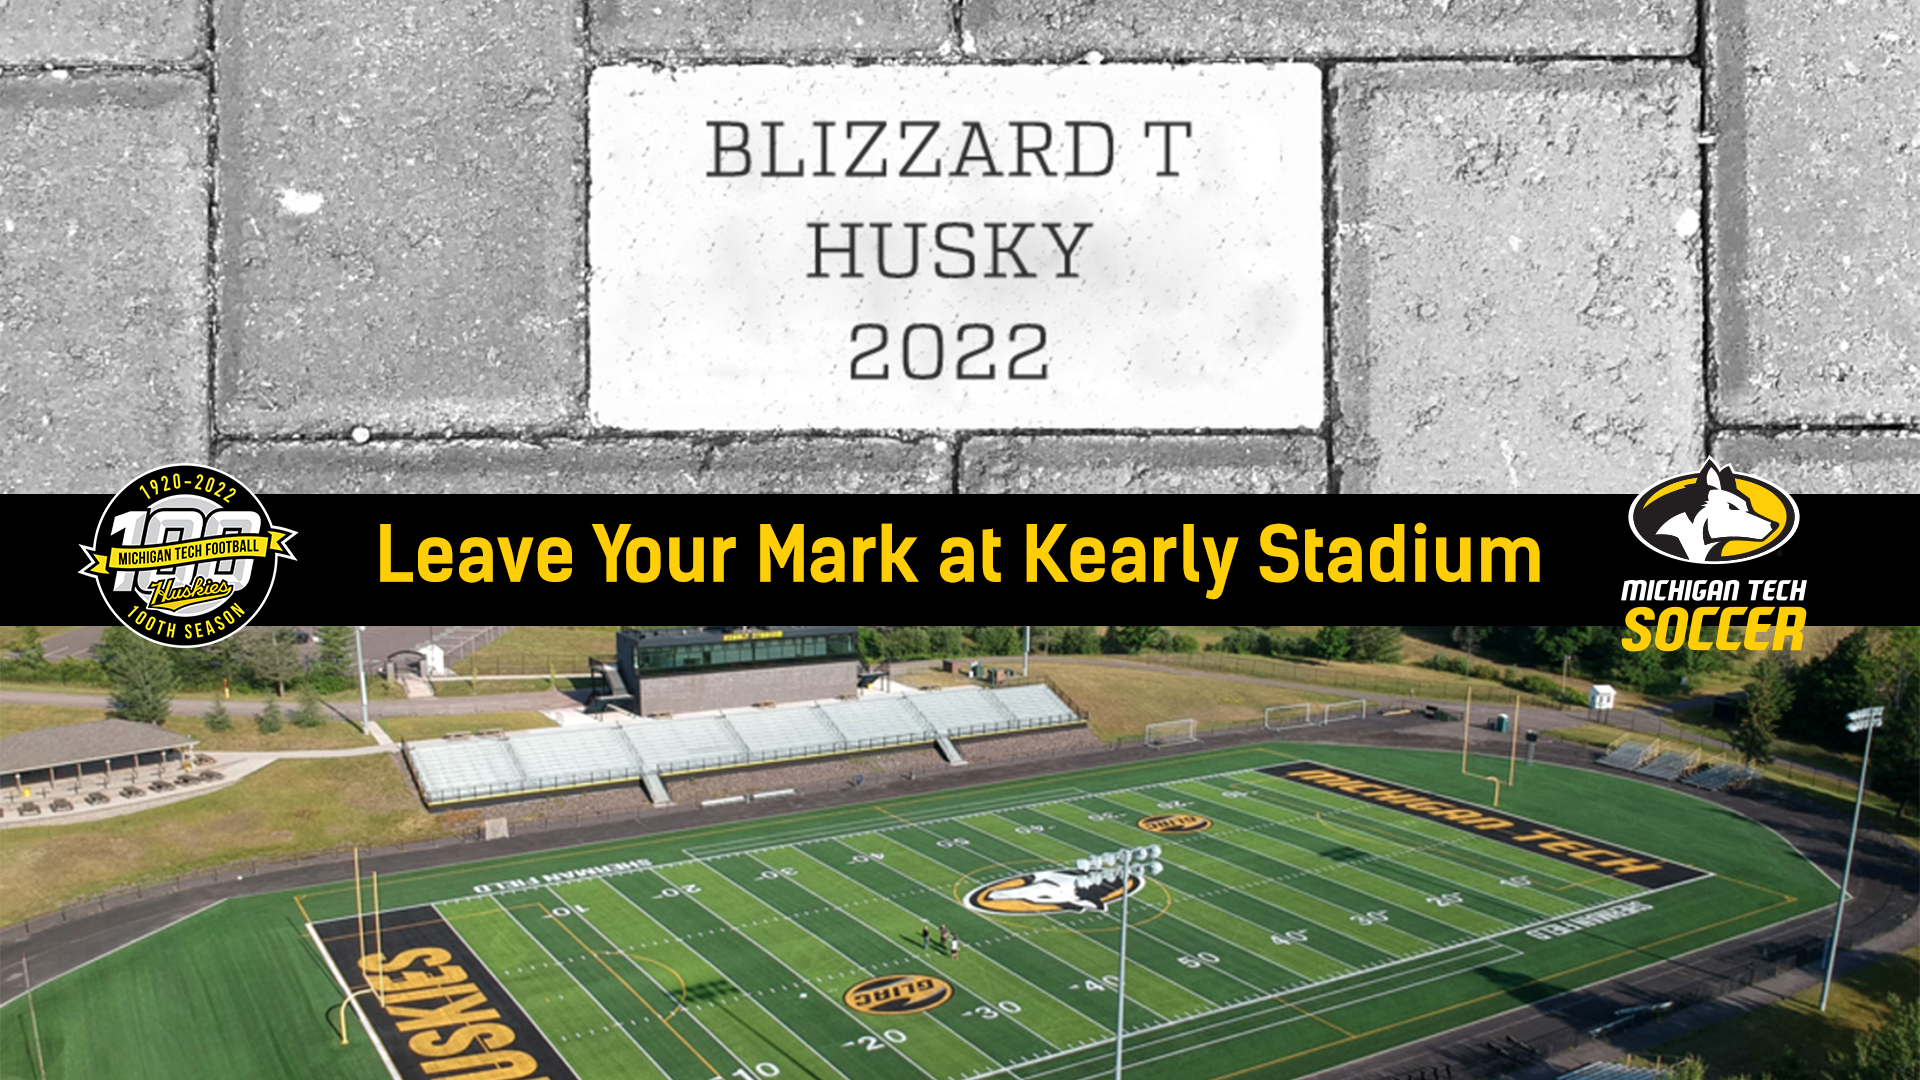 Leave Your Mark at Kearly Stadium